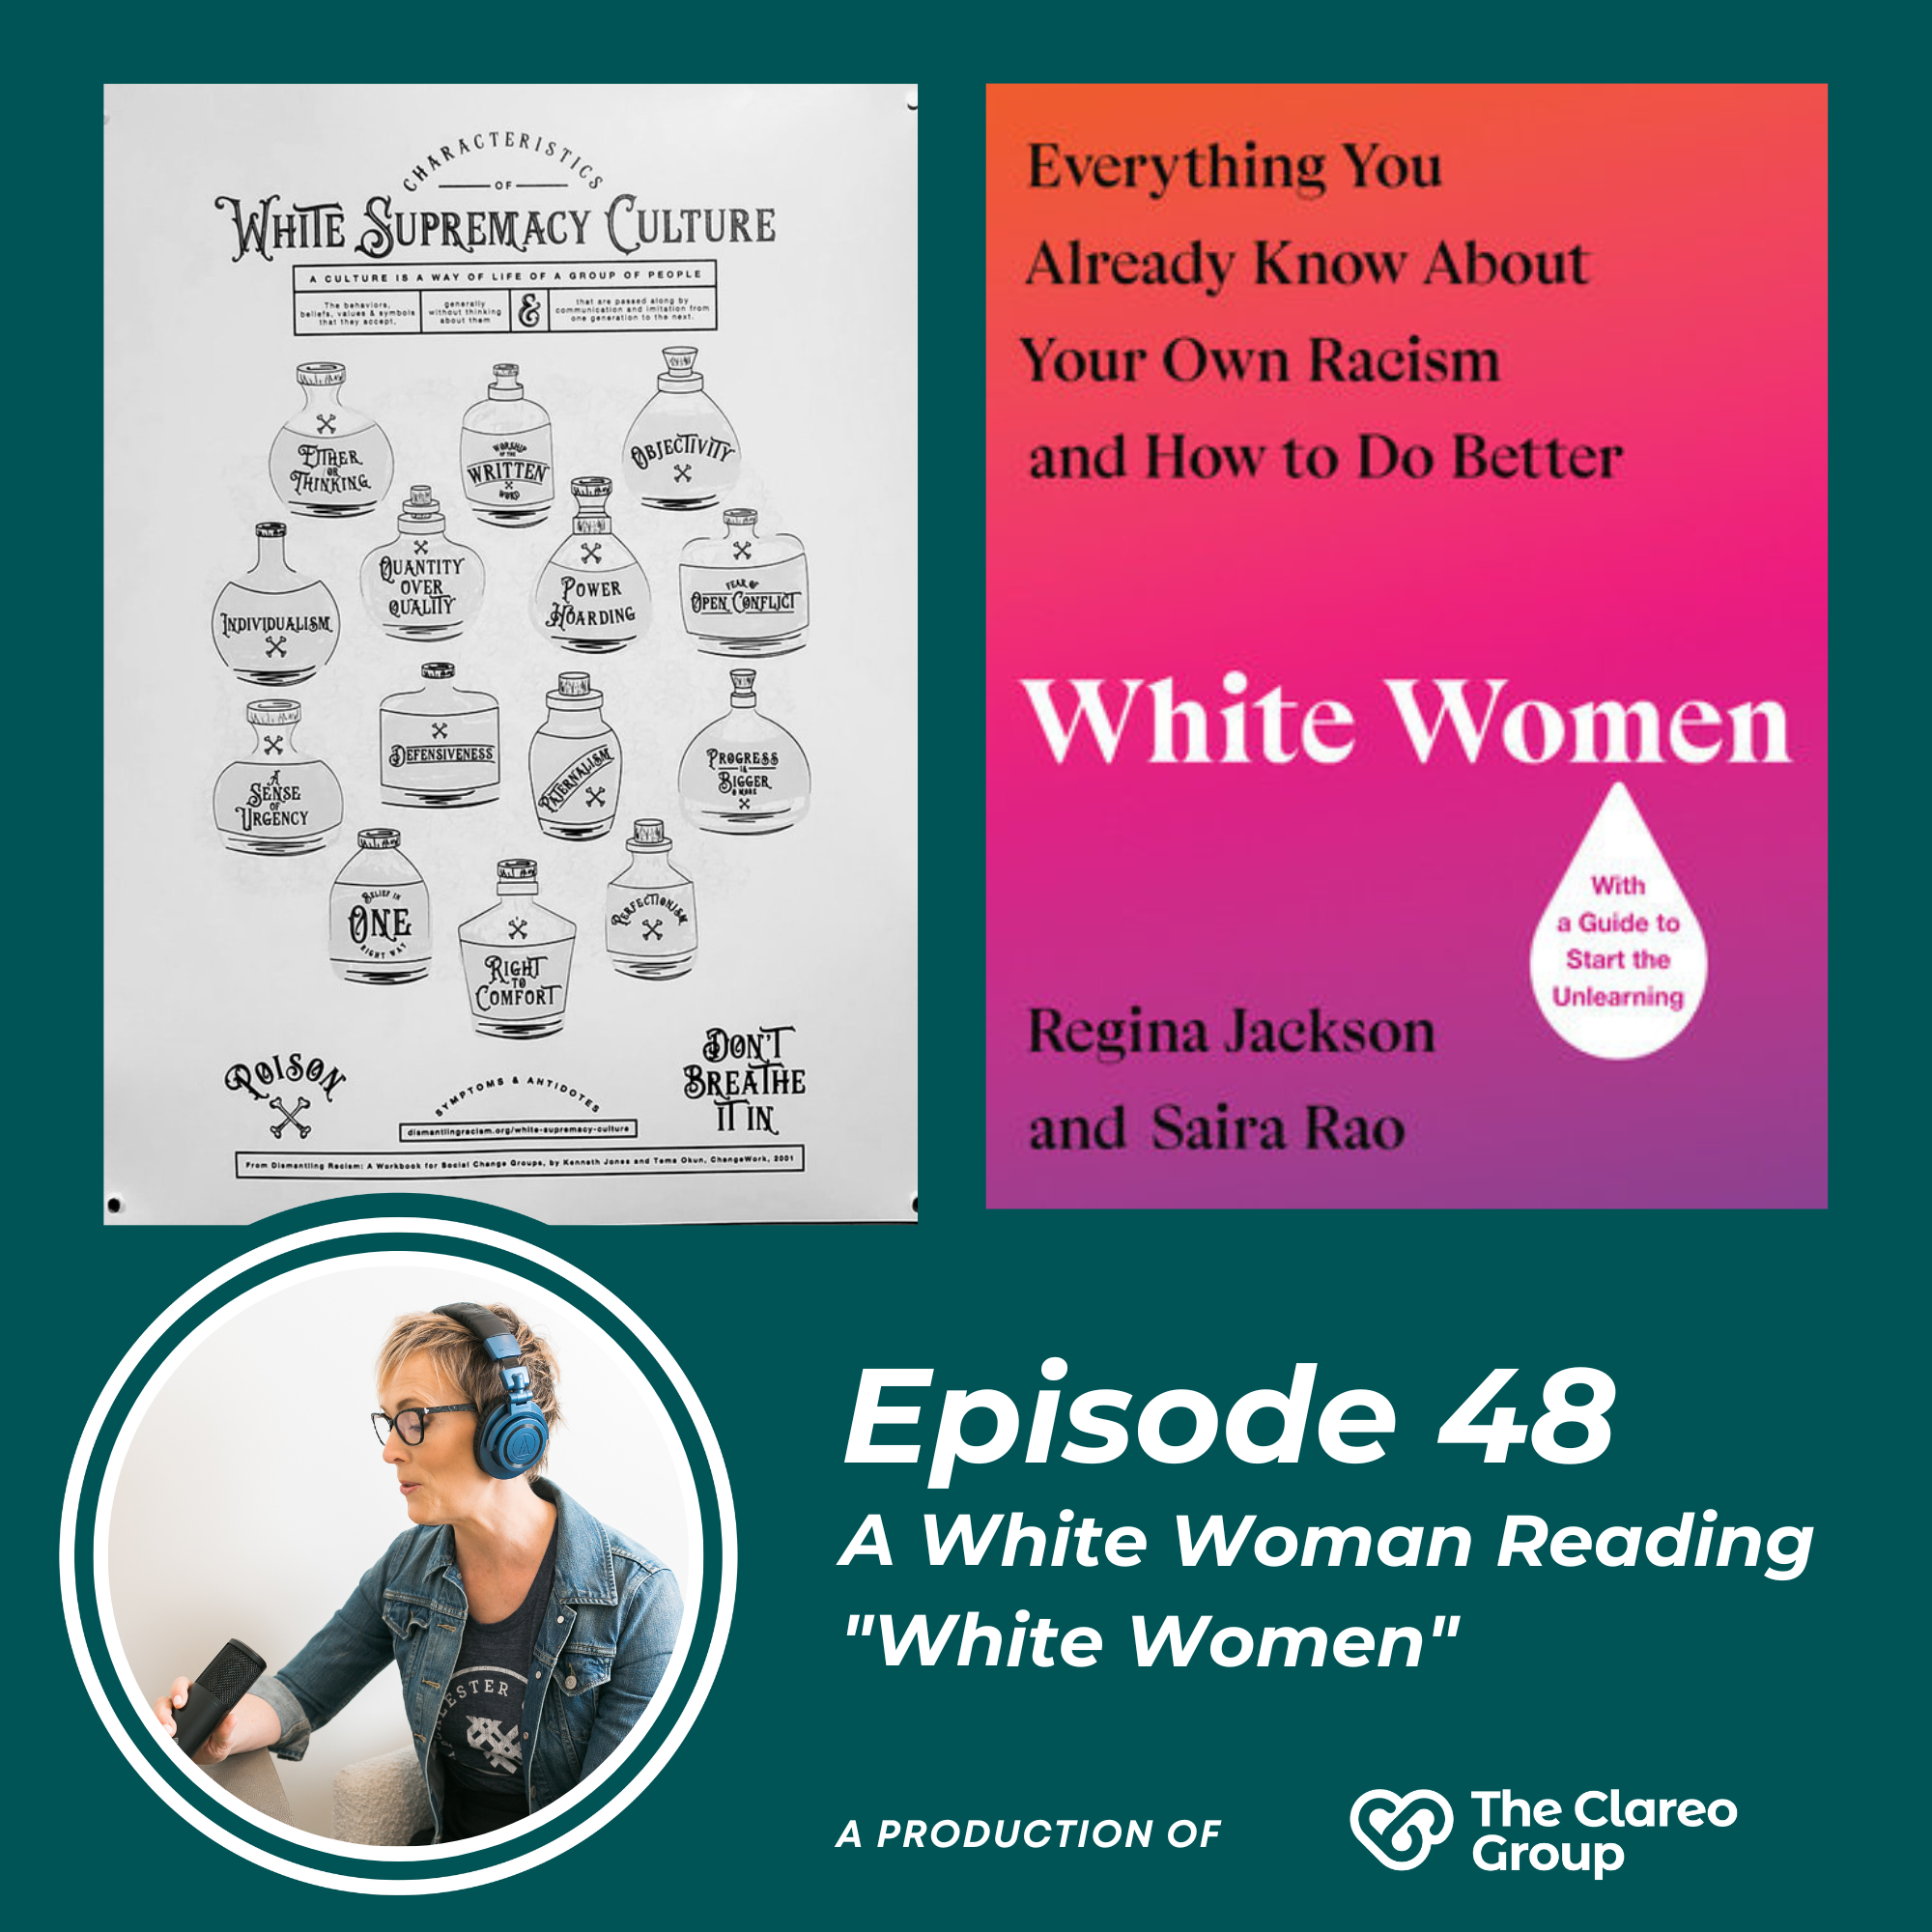 the poster of white supremacy culture characteristics next to the cover of the book, "white women: everything you already know about your own racism and how to do better."